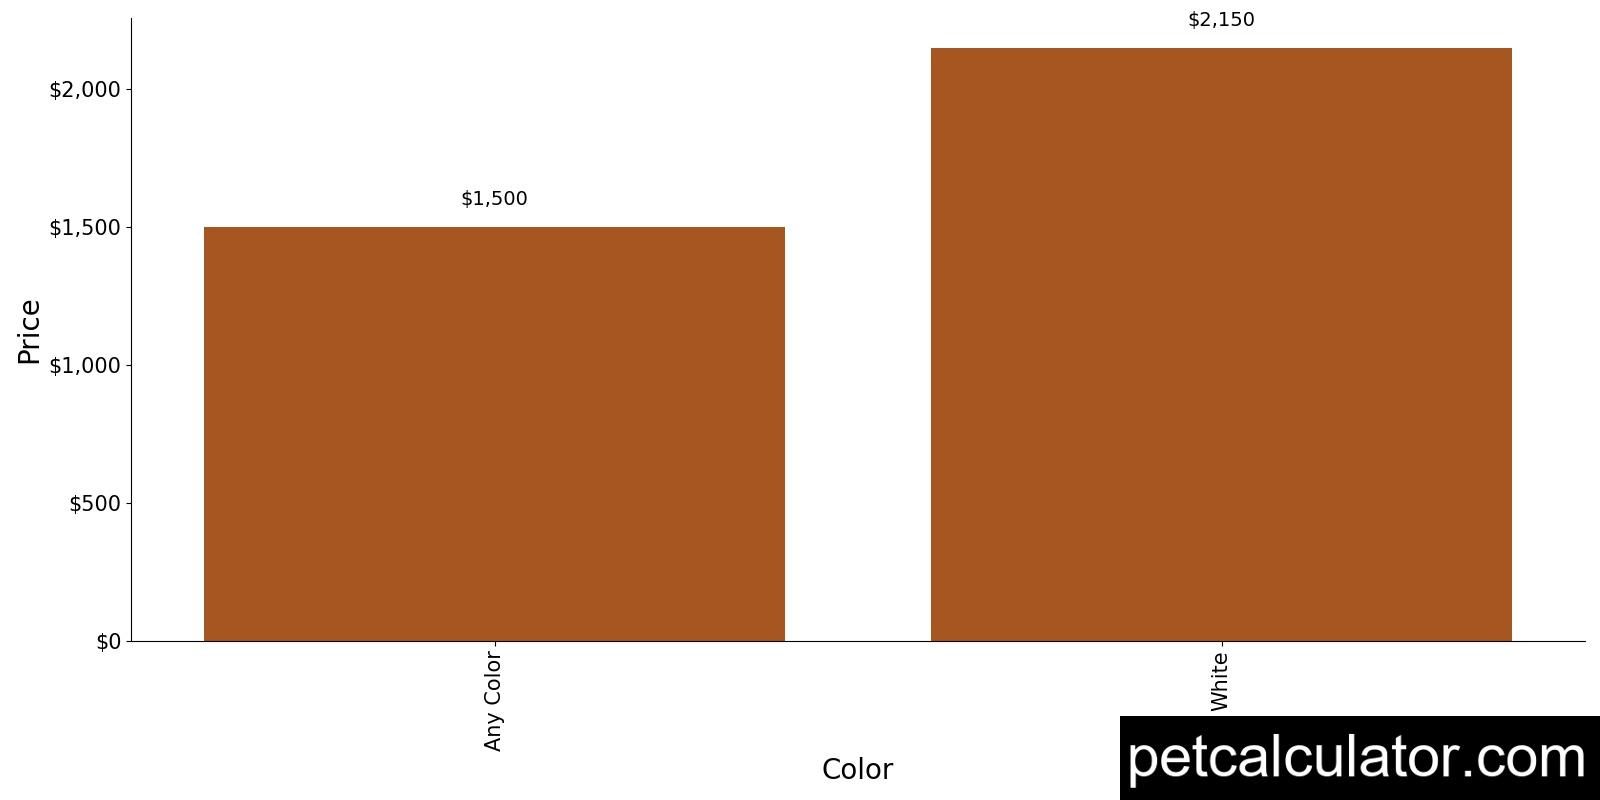 Price of Papipoo by Color 